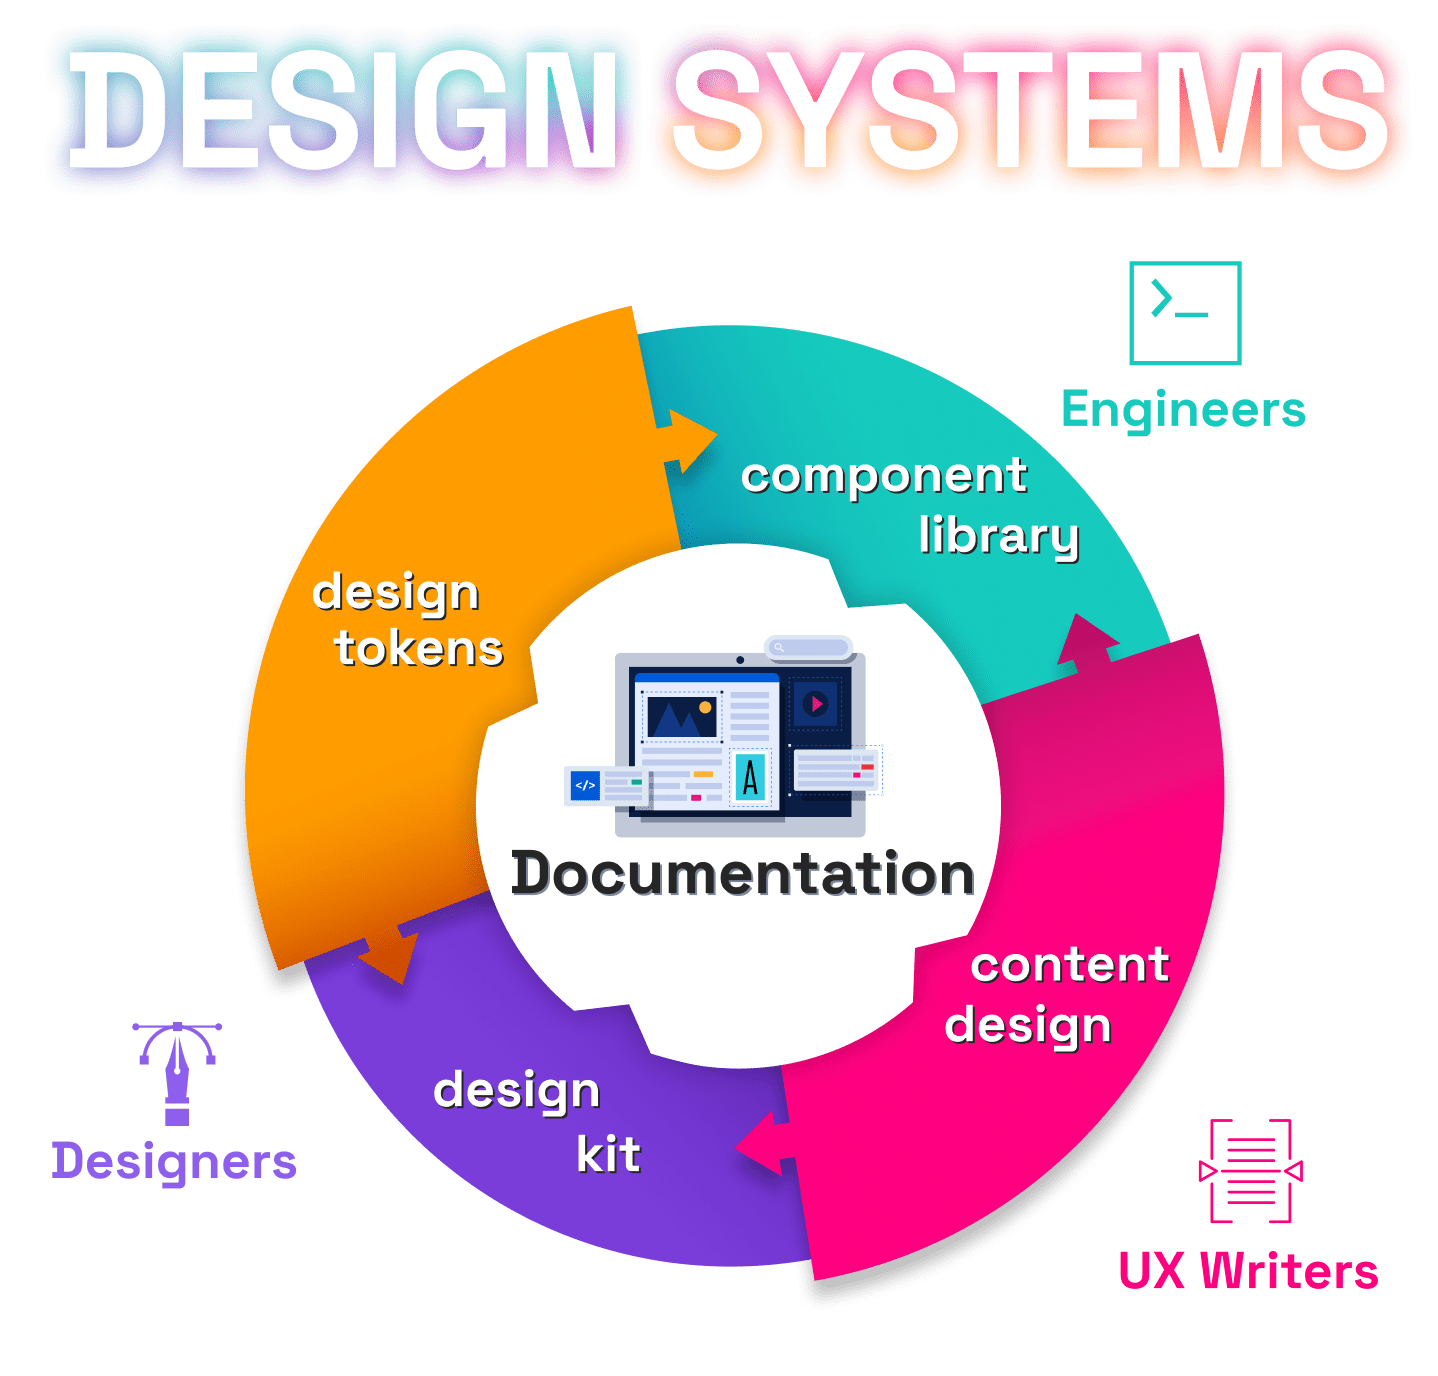 Design Systems composed of 4 elements : Design Tokens, Design Kit, Component Libary and Documentation site. Designers on the Design Kit side and Developers on the Component Library side